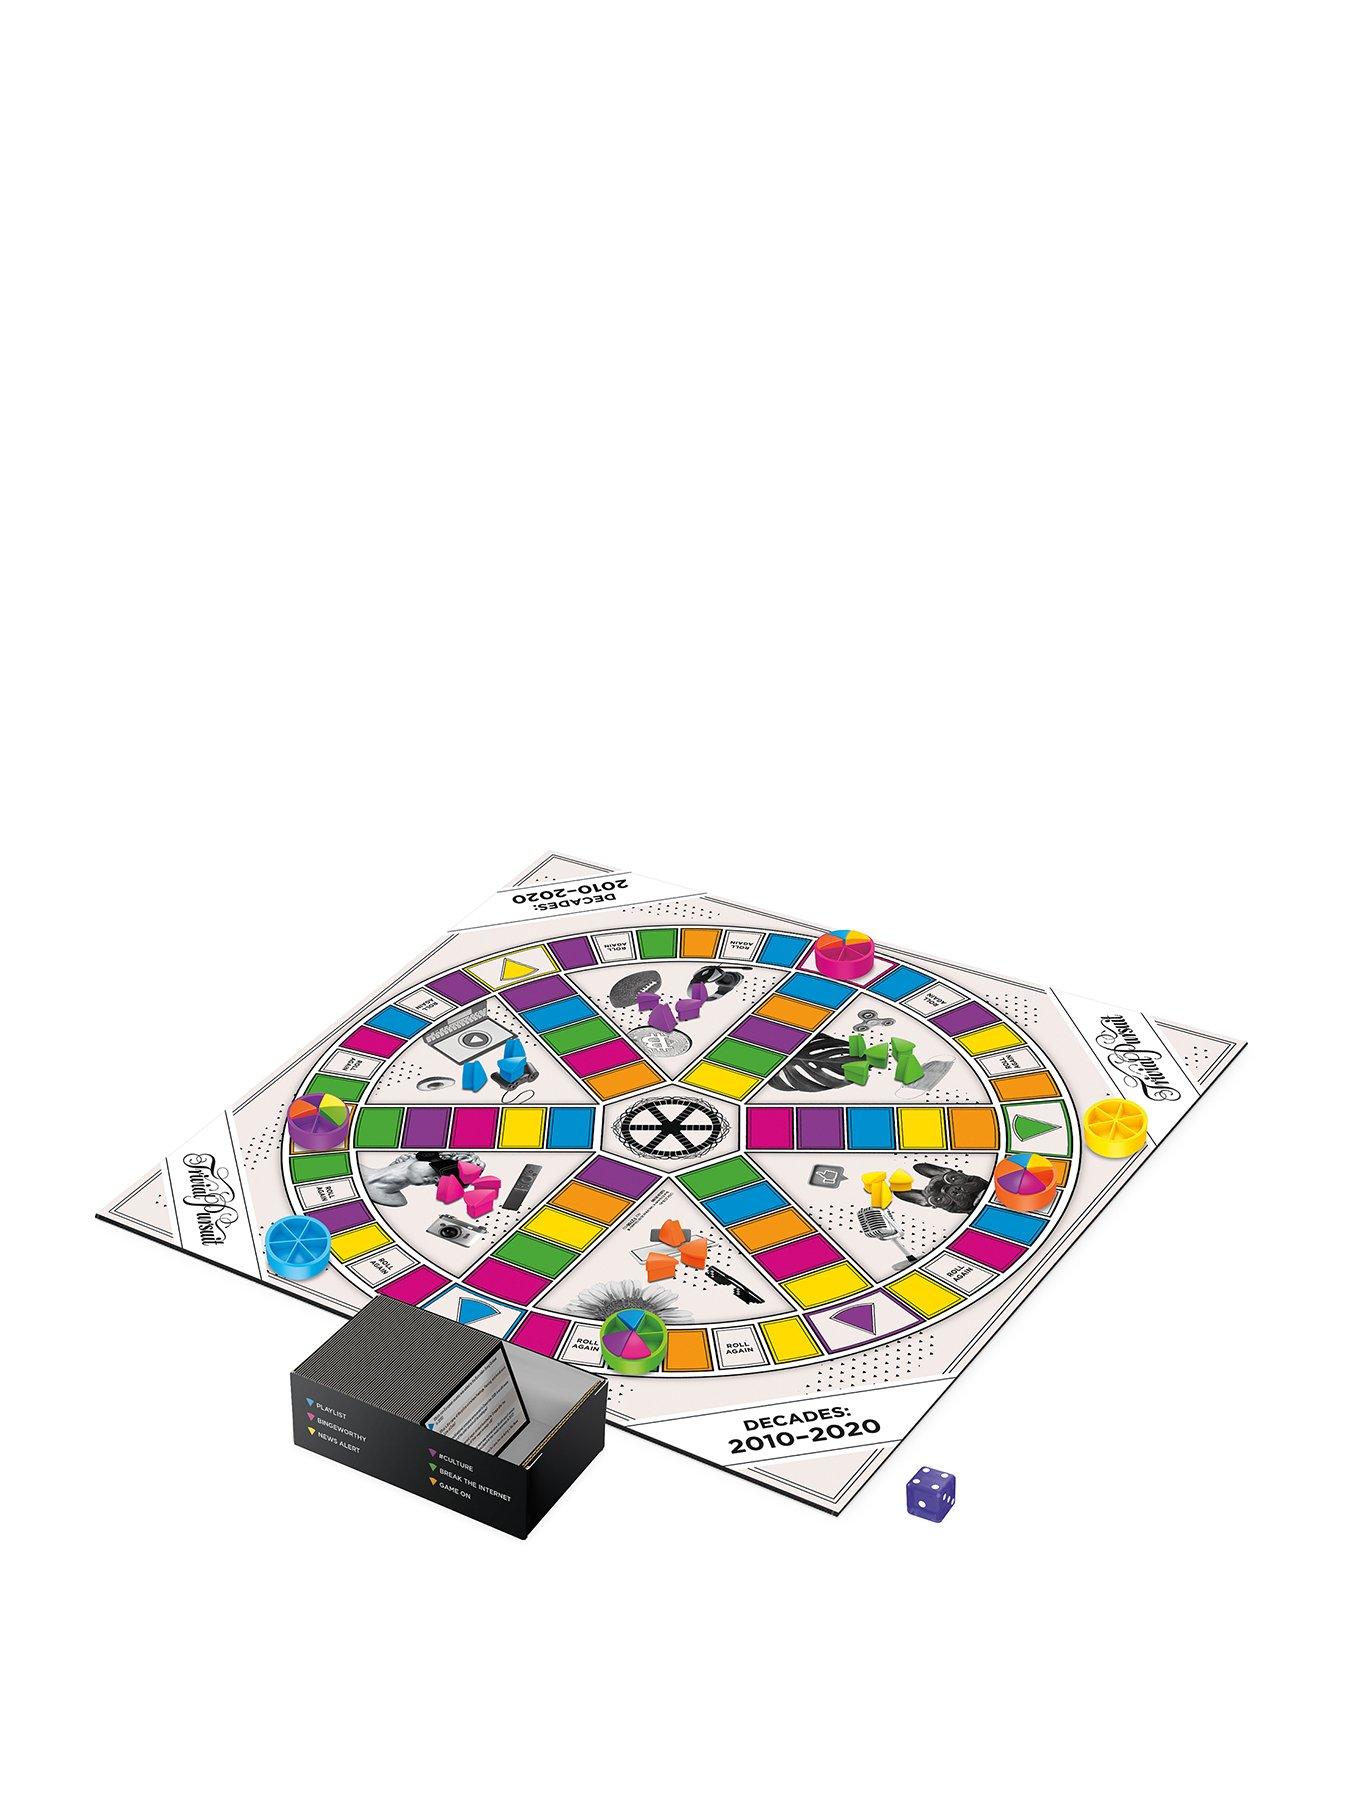 Hasbro Trivial Pursuit Decades 2010 to 2020 Board Game for Adults and ...